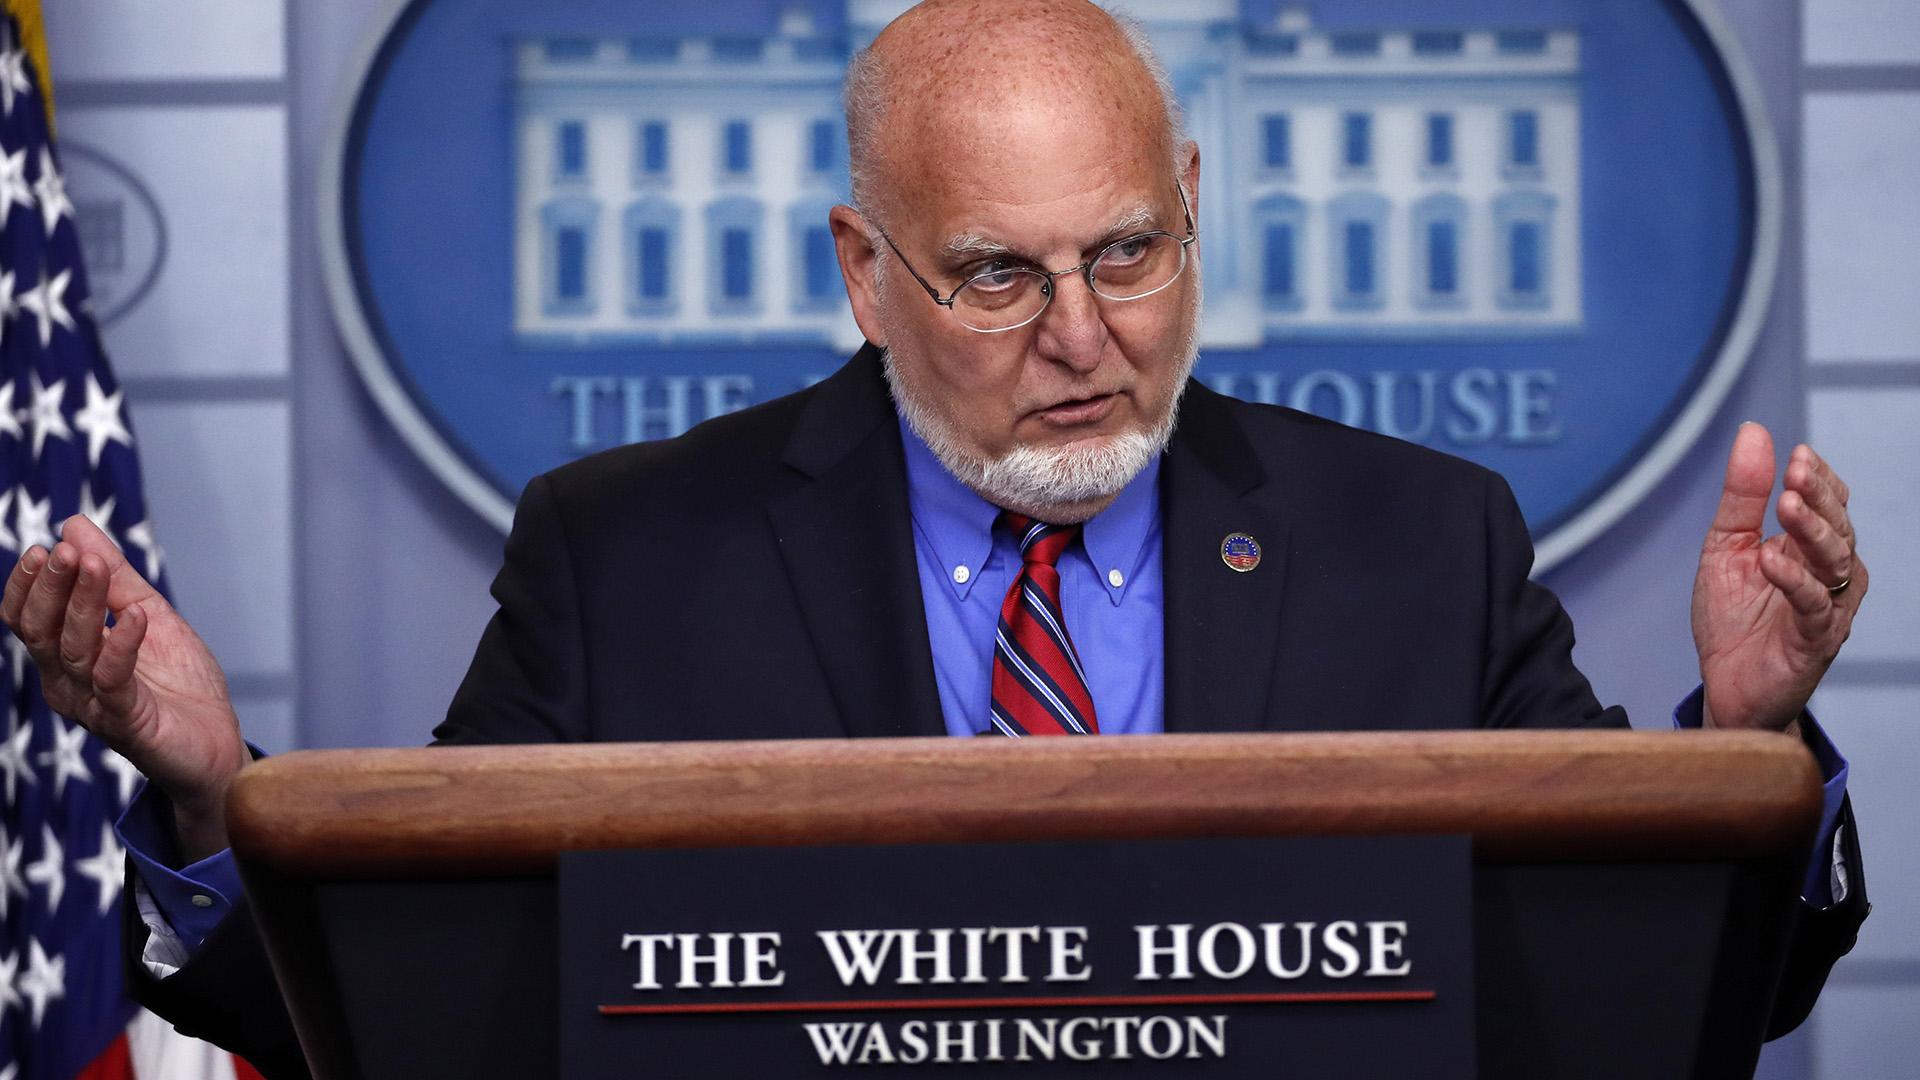 In this April 22, 2020, file photo Dr. Robert Redfield, director of the Centers for Disease Control and Prevention, speaks about the coronavirus in the James Brady Press Briefing Room of the White House in Washington. (AP Photo / Alex Brandon, File)